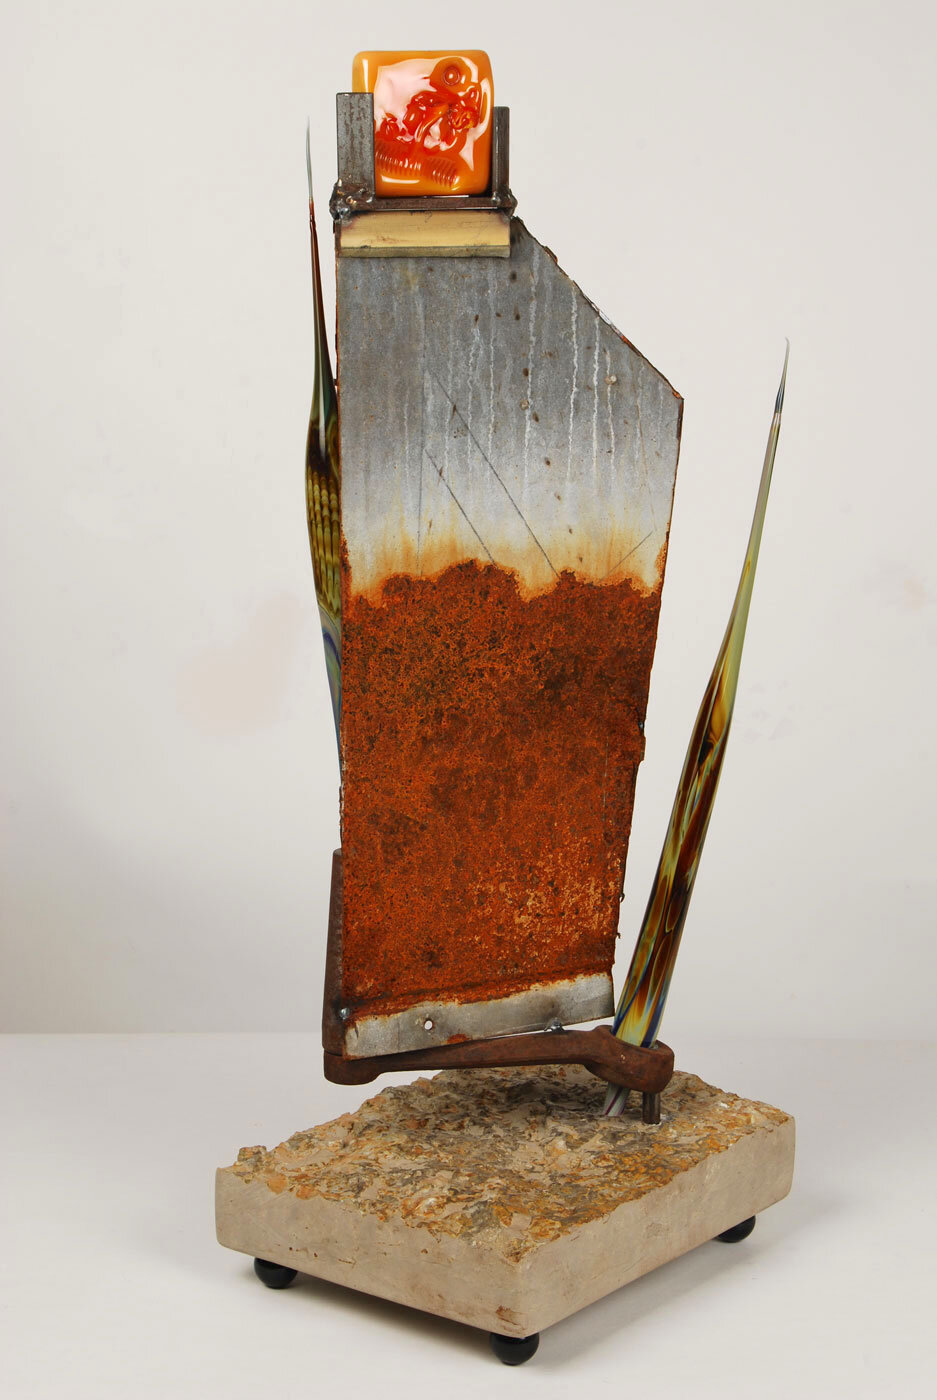    Chaos No. 6 Blowing in the Wind  , 25” x 10” x 8”, glass / steel / limestone 